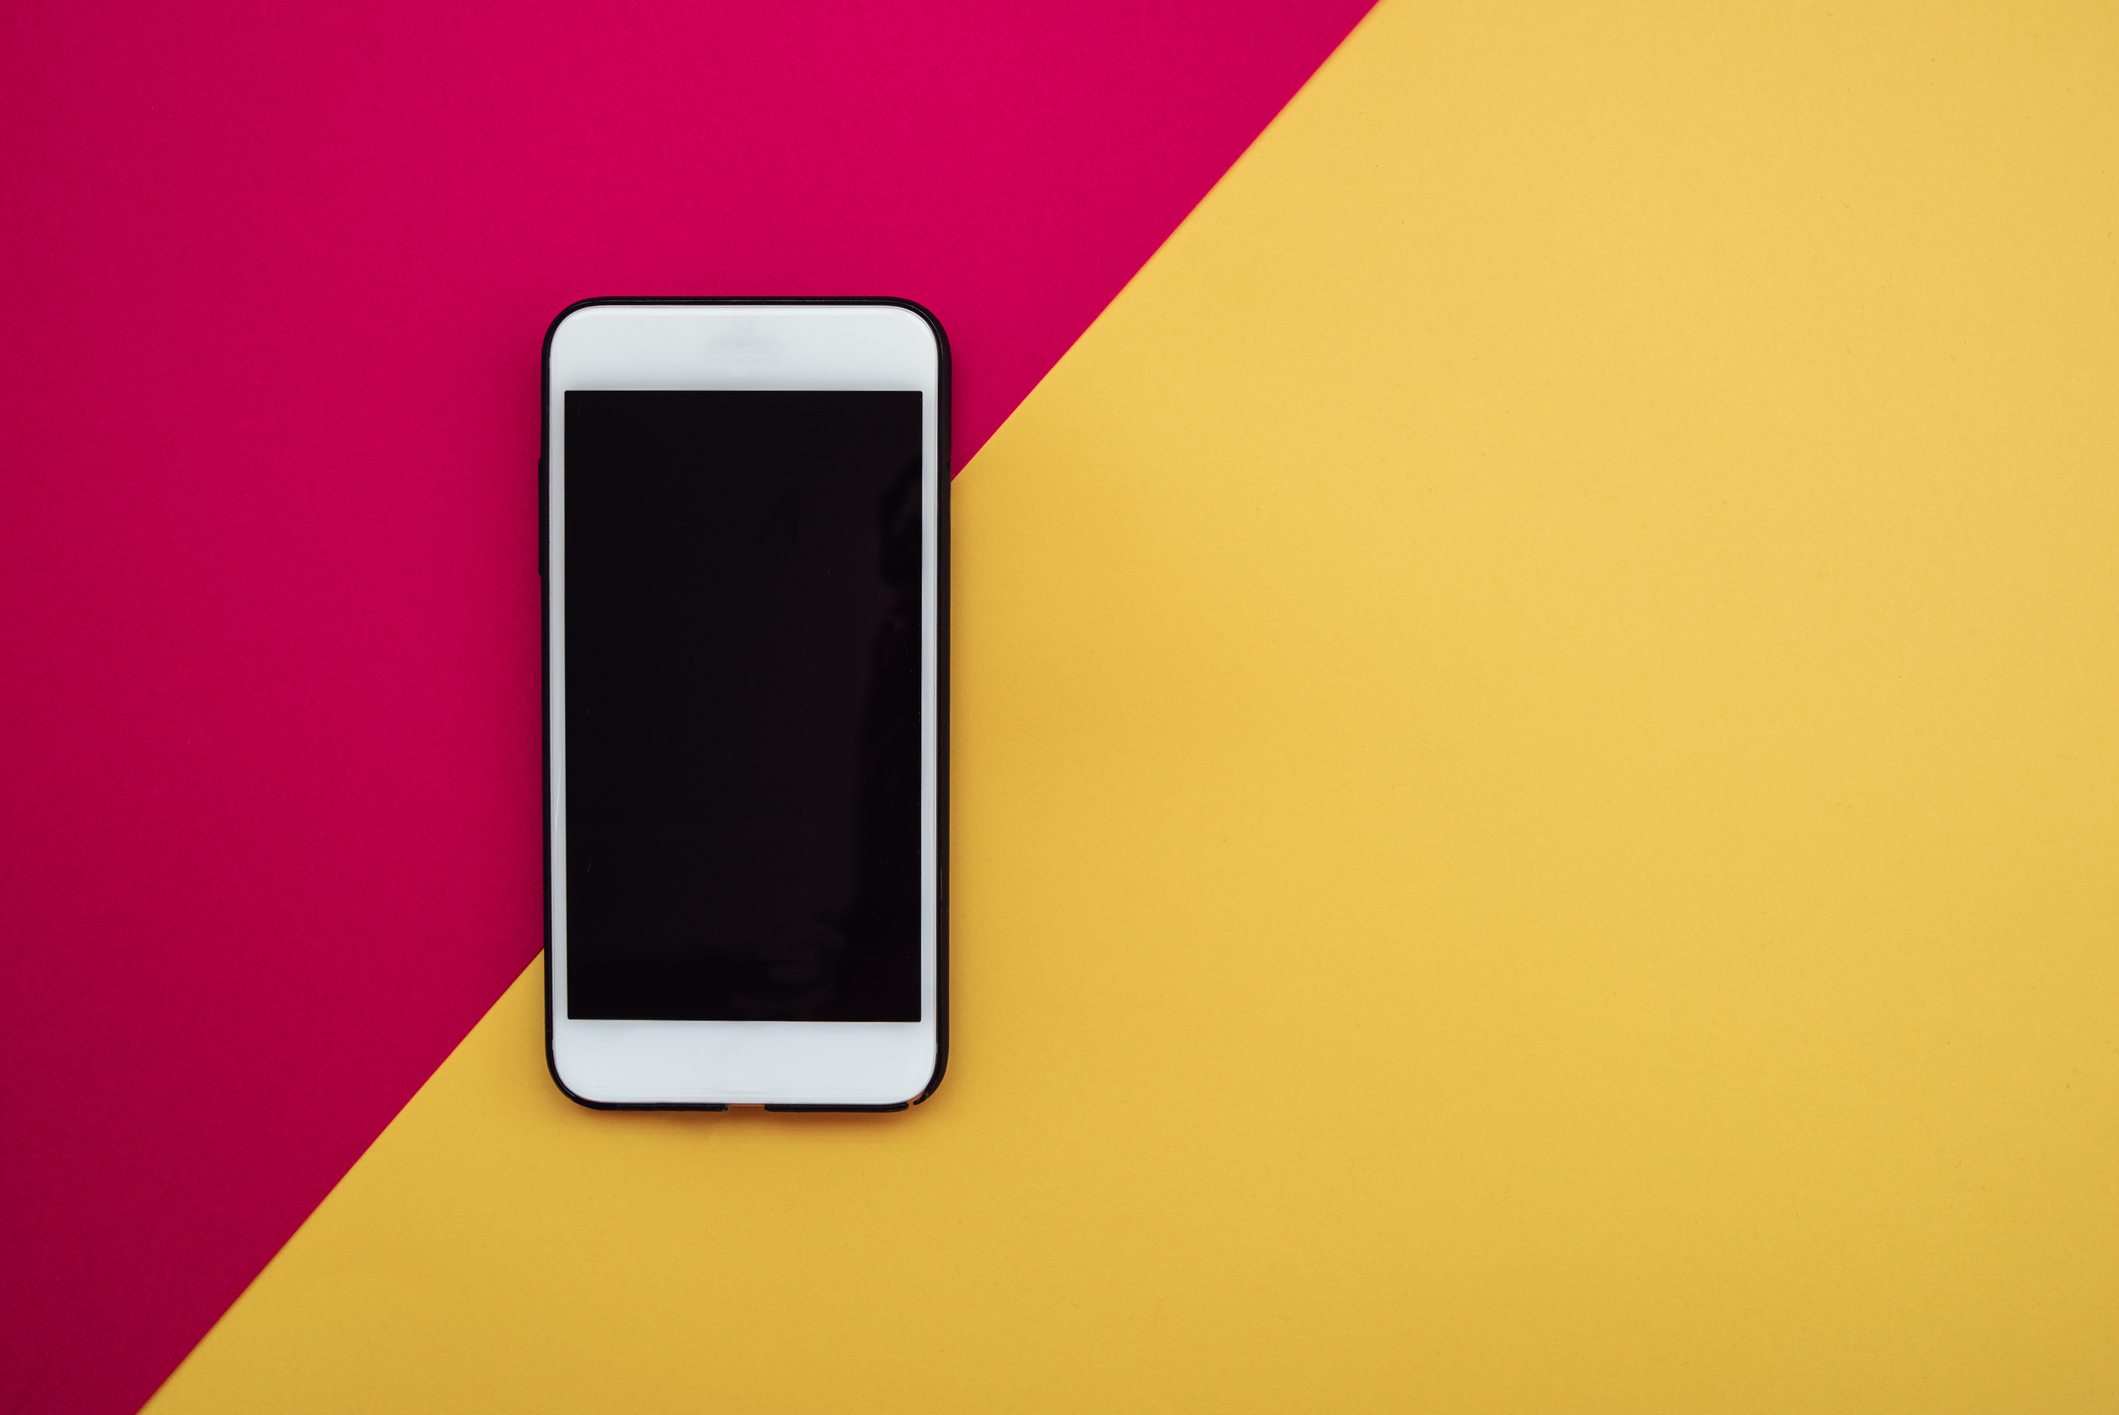 Smartphone on colorful background